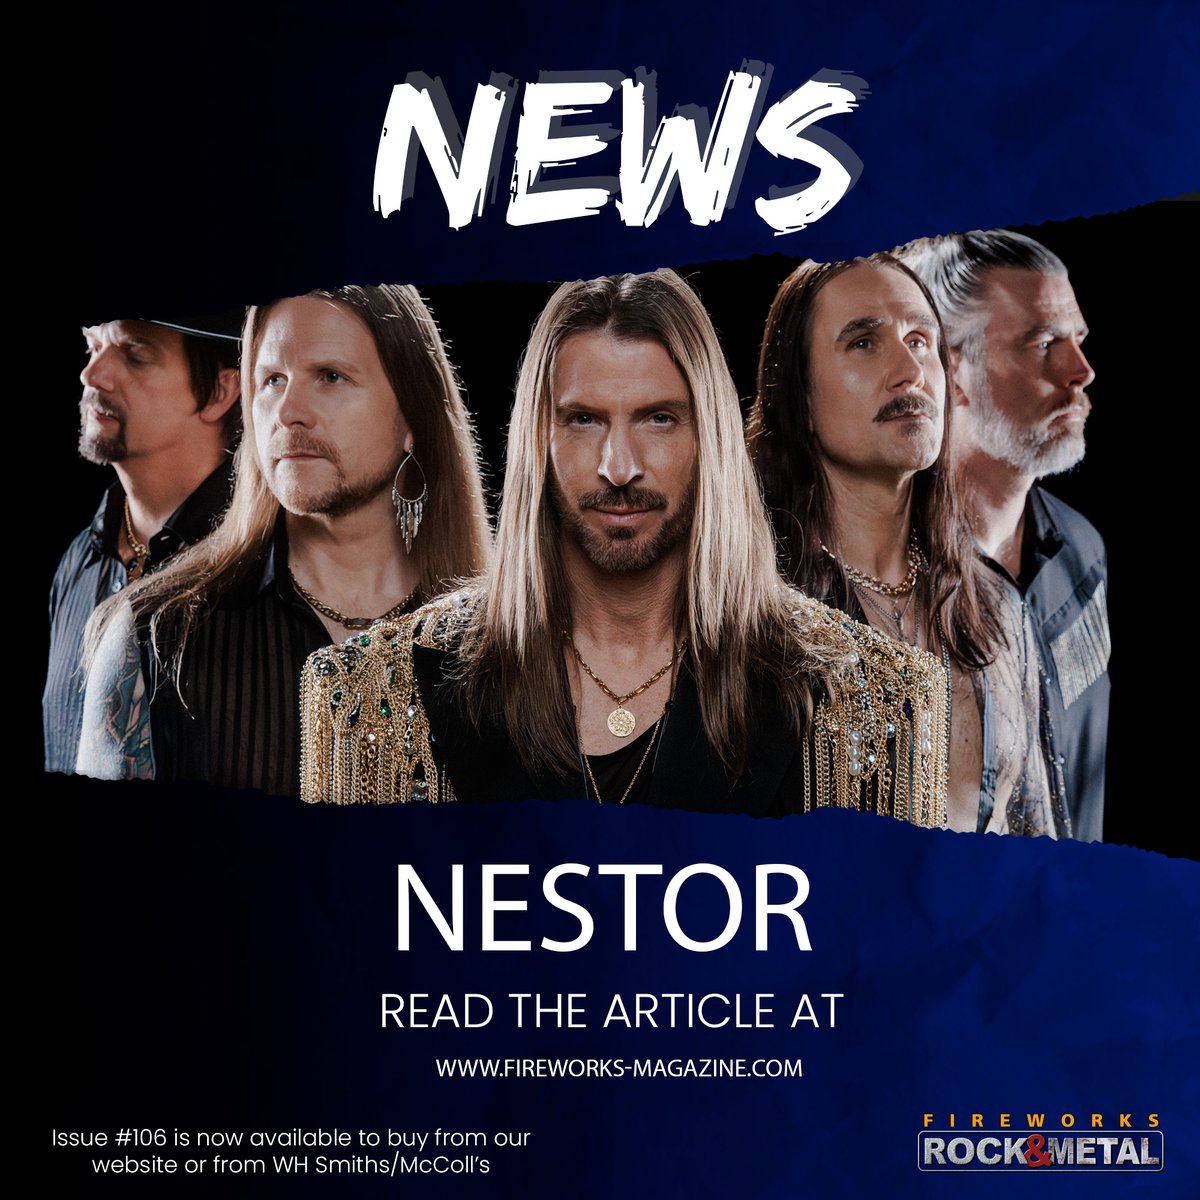 𝗟𝗢𝗩𝗘 𝗜𝗧! Rising 80s Hard Rockers NESTOR Present Brand New Anthem “Caroline” + Official Video 𝘙𝘦𝘢𝘥 𝘢𝘣𝘰𝘶𝘵 𝘪𝘵 𝘩𝘦𝘳𝘦: wix.to/l9bdzk1 @NapalmRecords -- BUY Issue #106 from fireworks-magazine.com 𝙐𝙆 𝙎𝙪𝙗𝙨𝙘𝙧𝙞𝙥𝙩𝙞𝙤𝙣𝙨 𝙣𝙤𝙬 𝙟𝙪𝙨𝙩 £32.